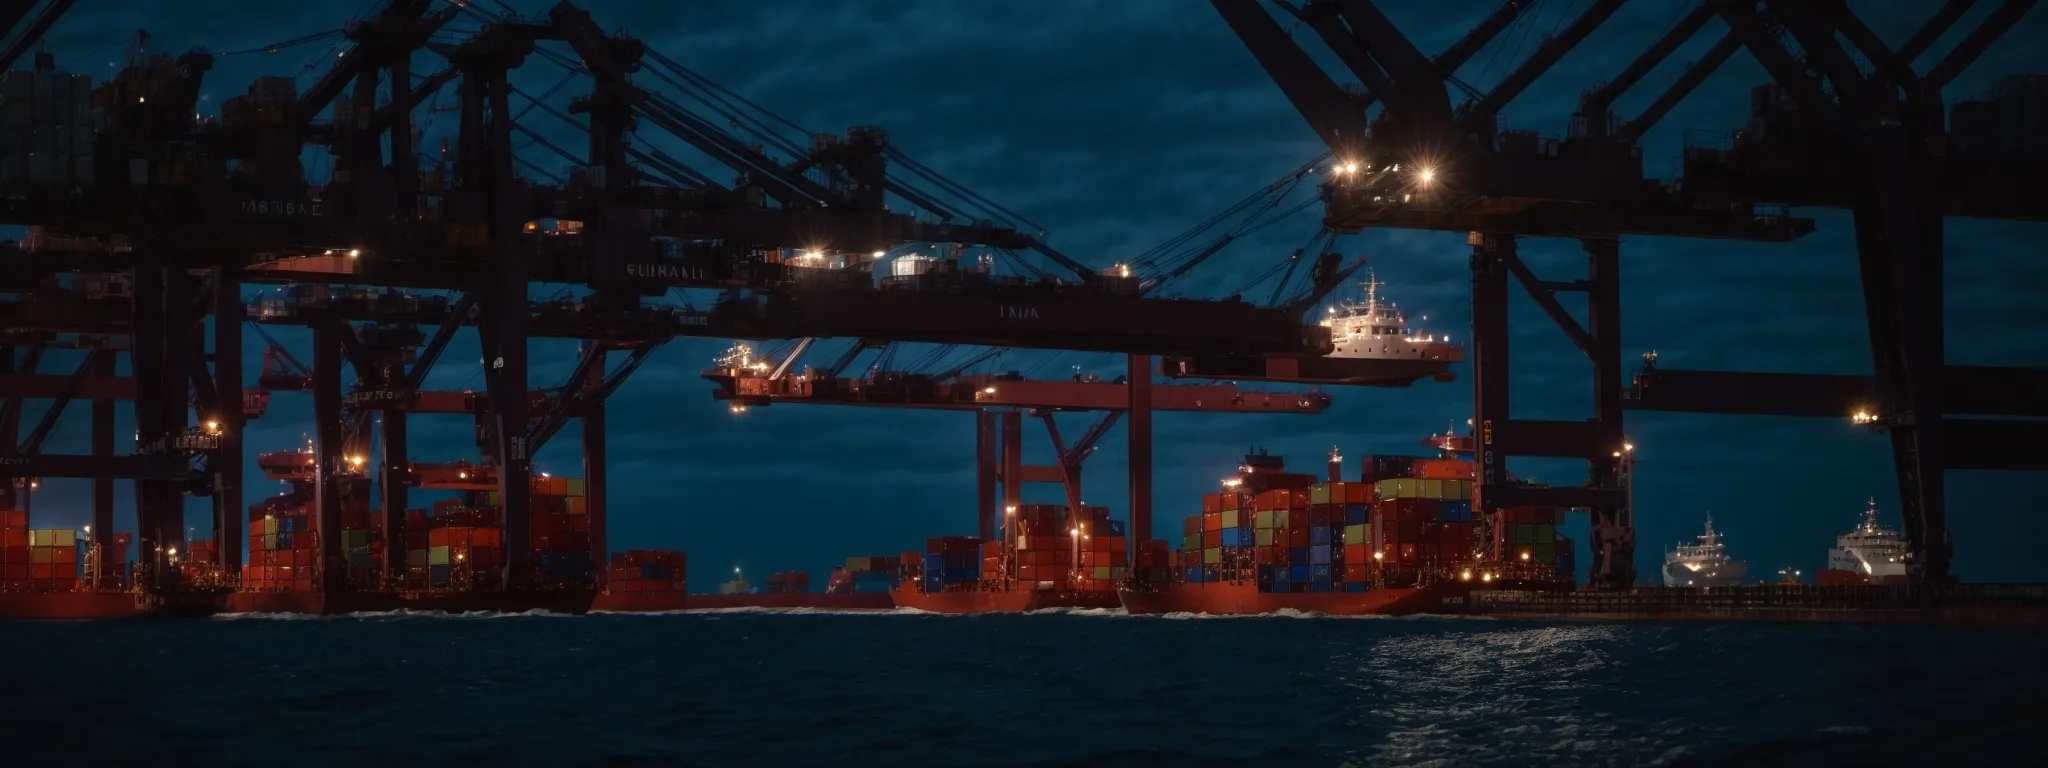 containers being loaded onto a cargo ship in the twilight hours, underscoring the interplay of efficiency and environmental mindfulness in modern logistics.